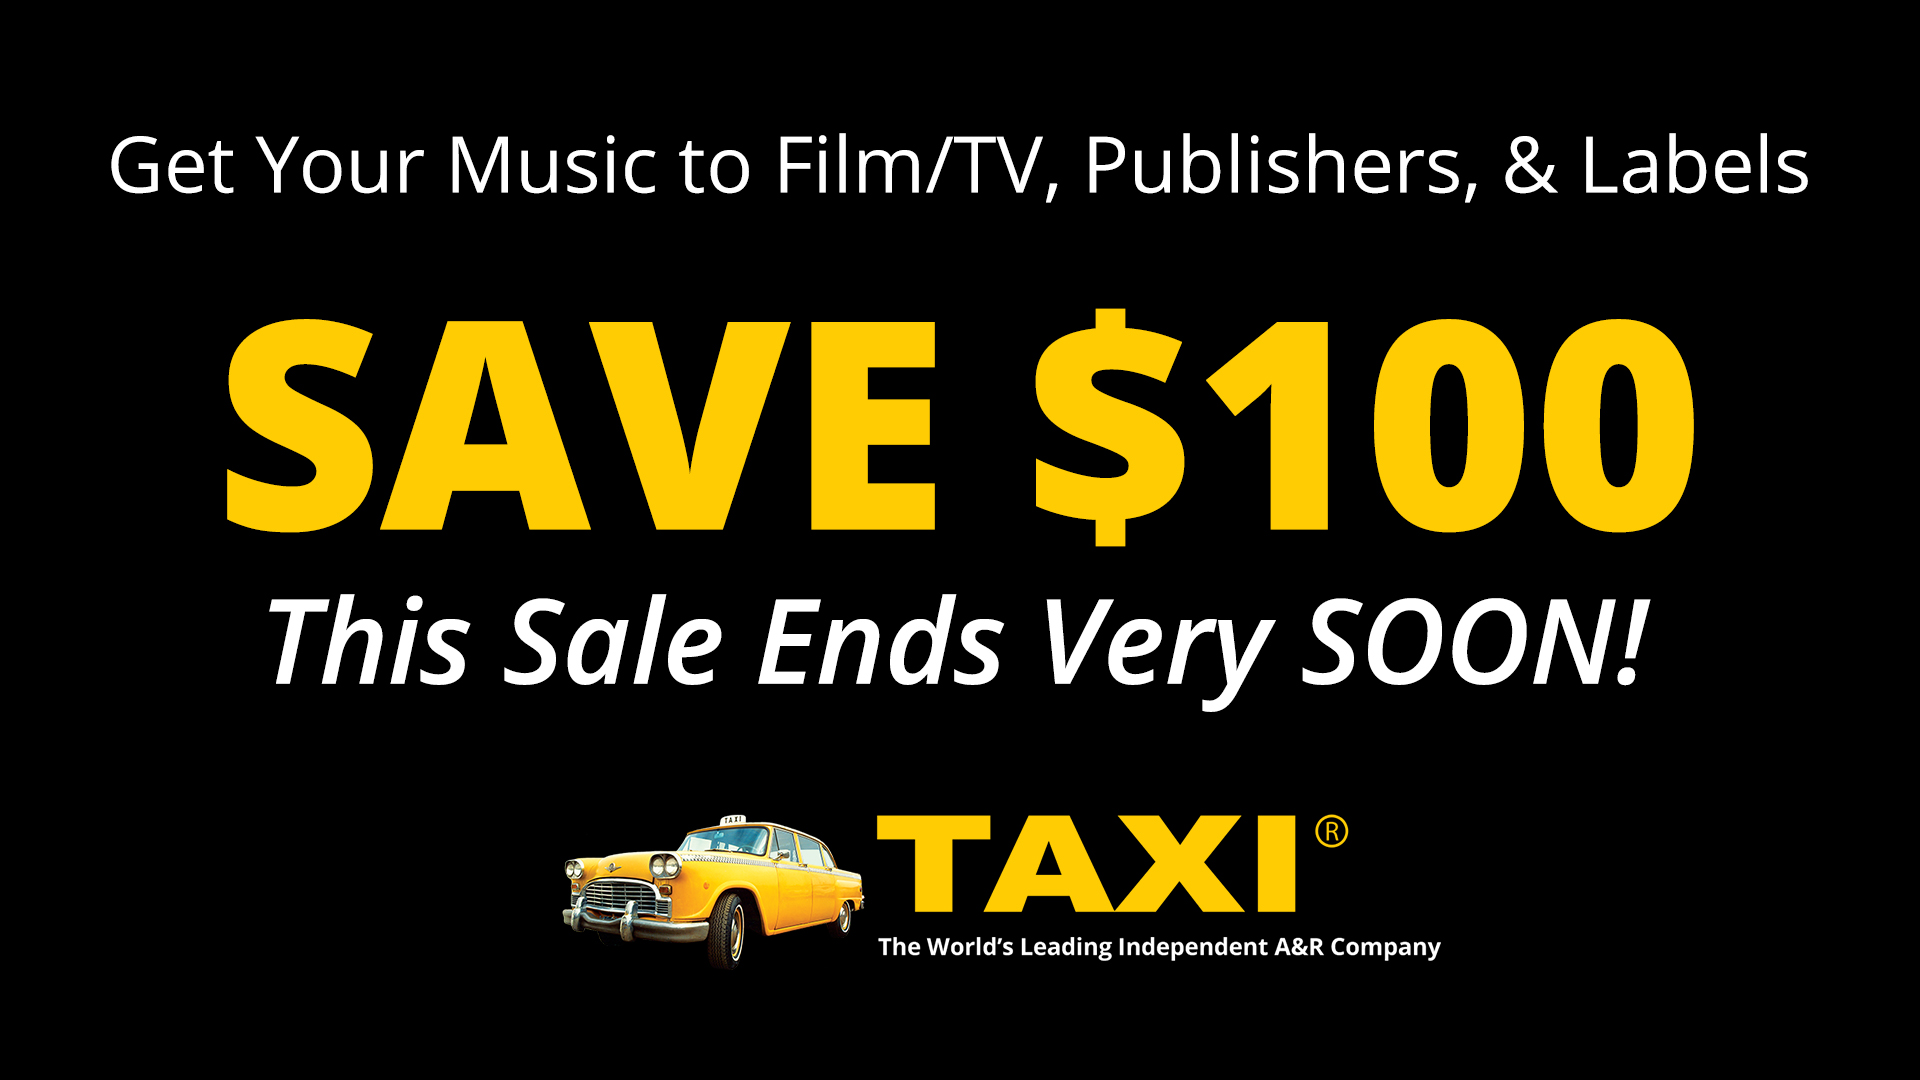 SAVE $100 on TAXI - This Sale Ends Very SOON!